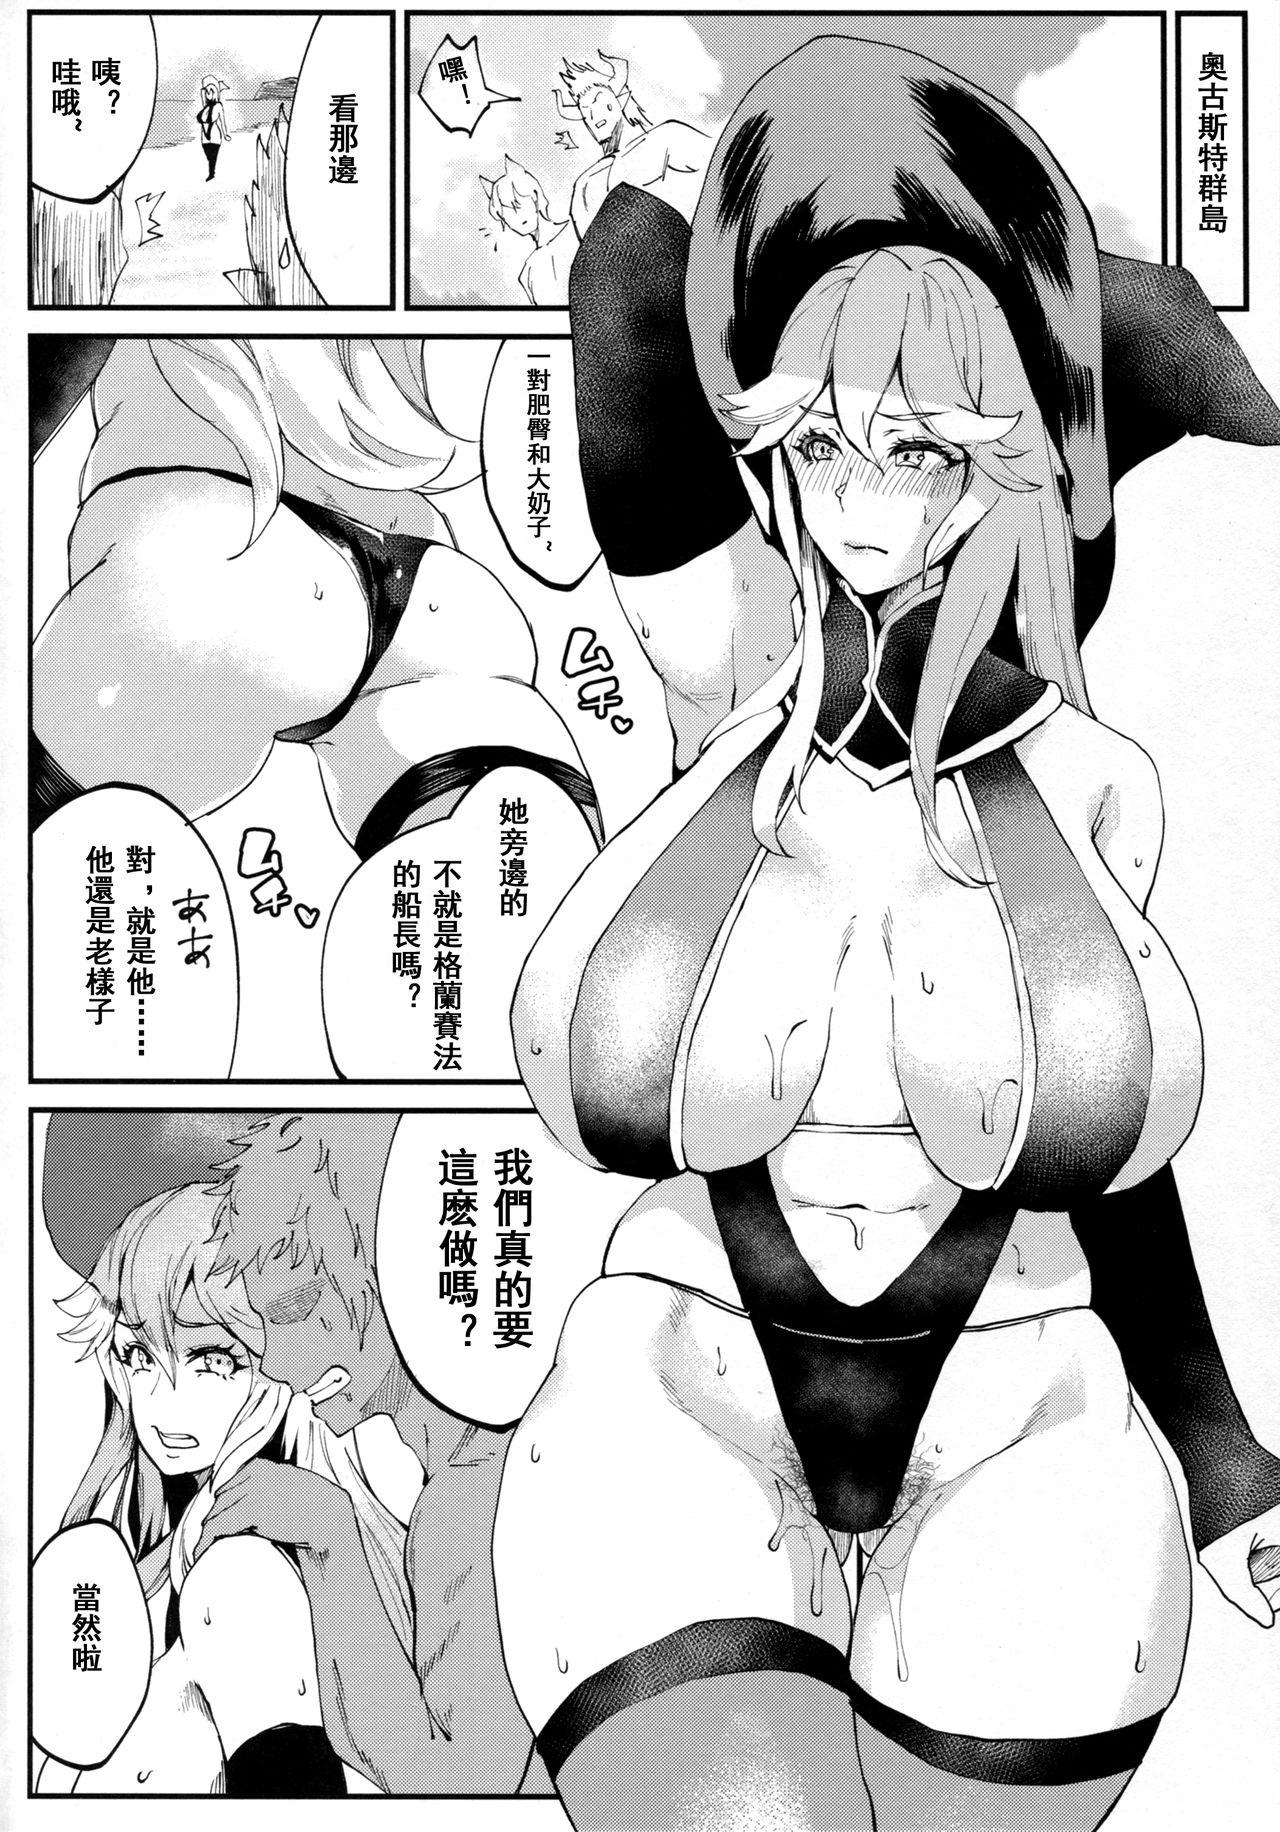 First Bitch Beach Witch - Granblue fantasy Assfingering - Page 5